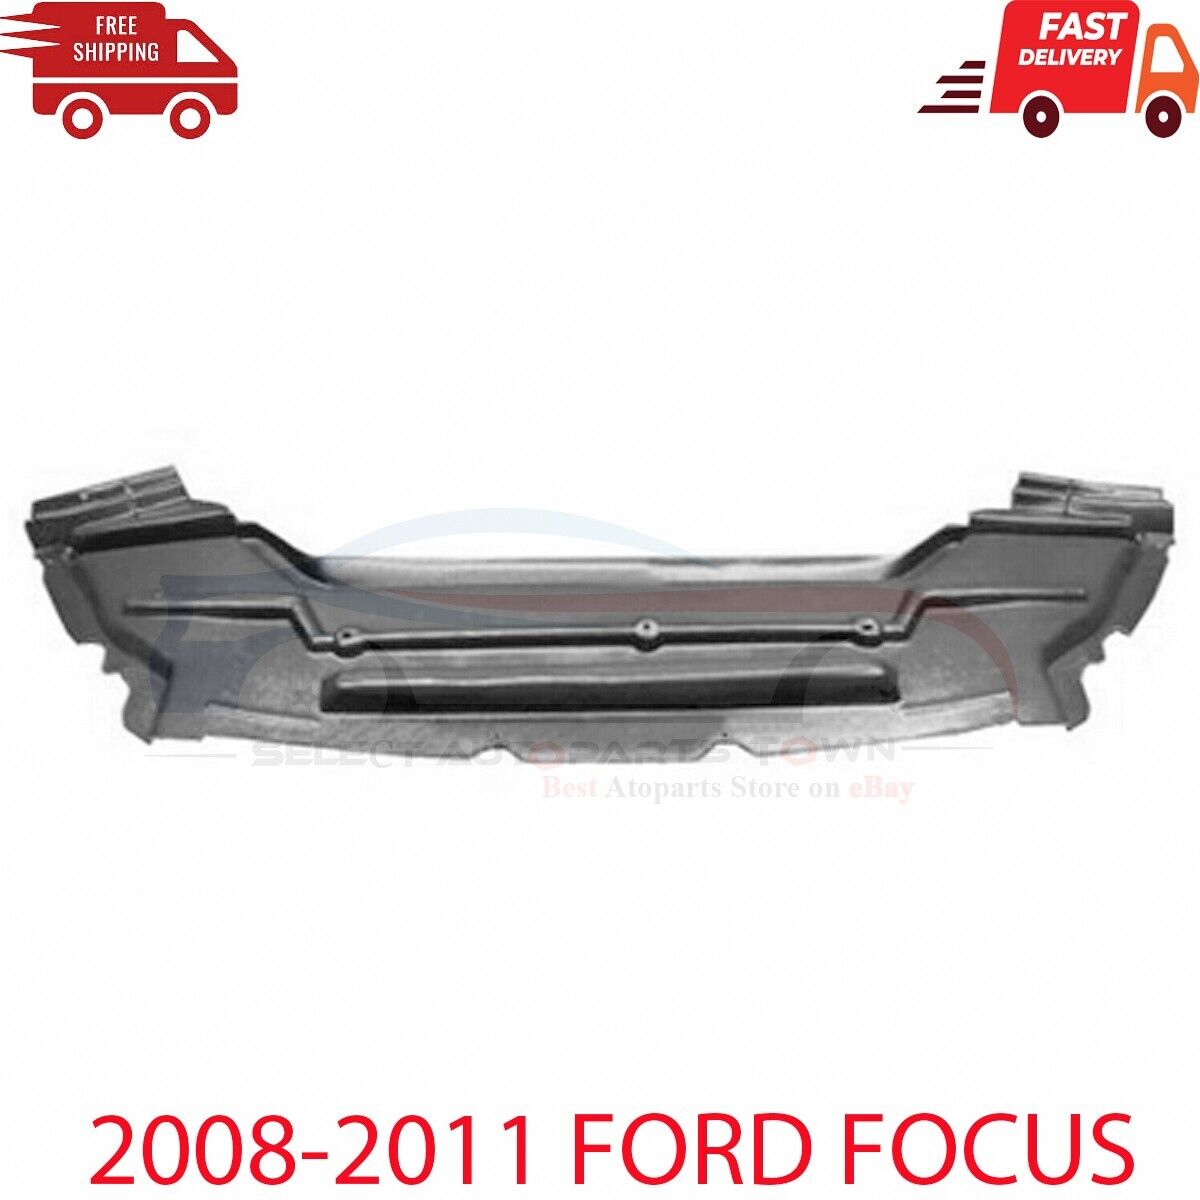 New Fits 2008-2011 Ford Focus Front Engine Splash Shield Under Cover FO1218103